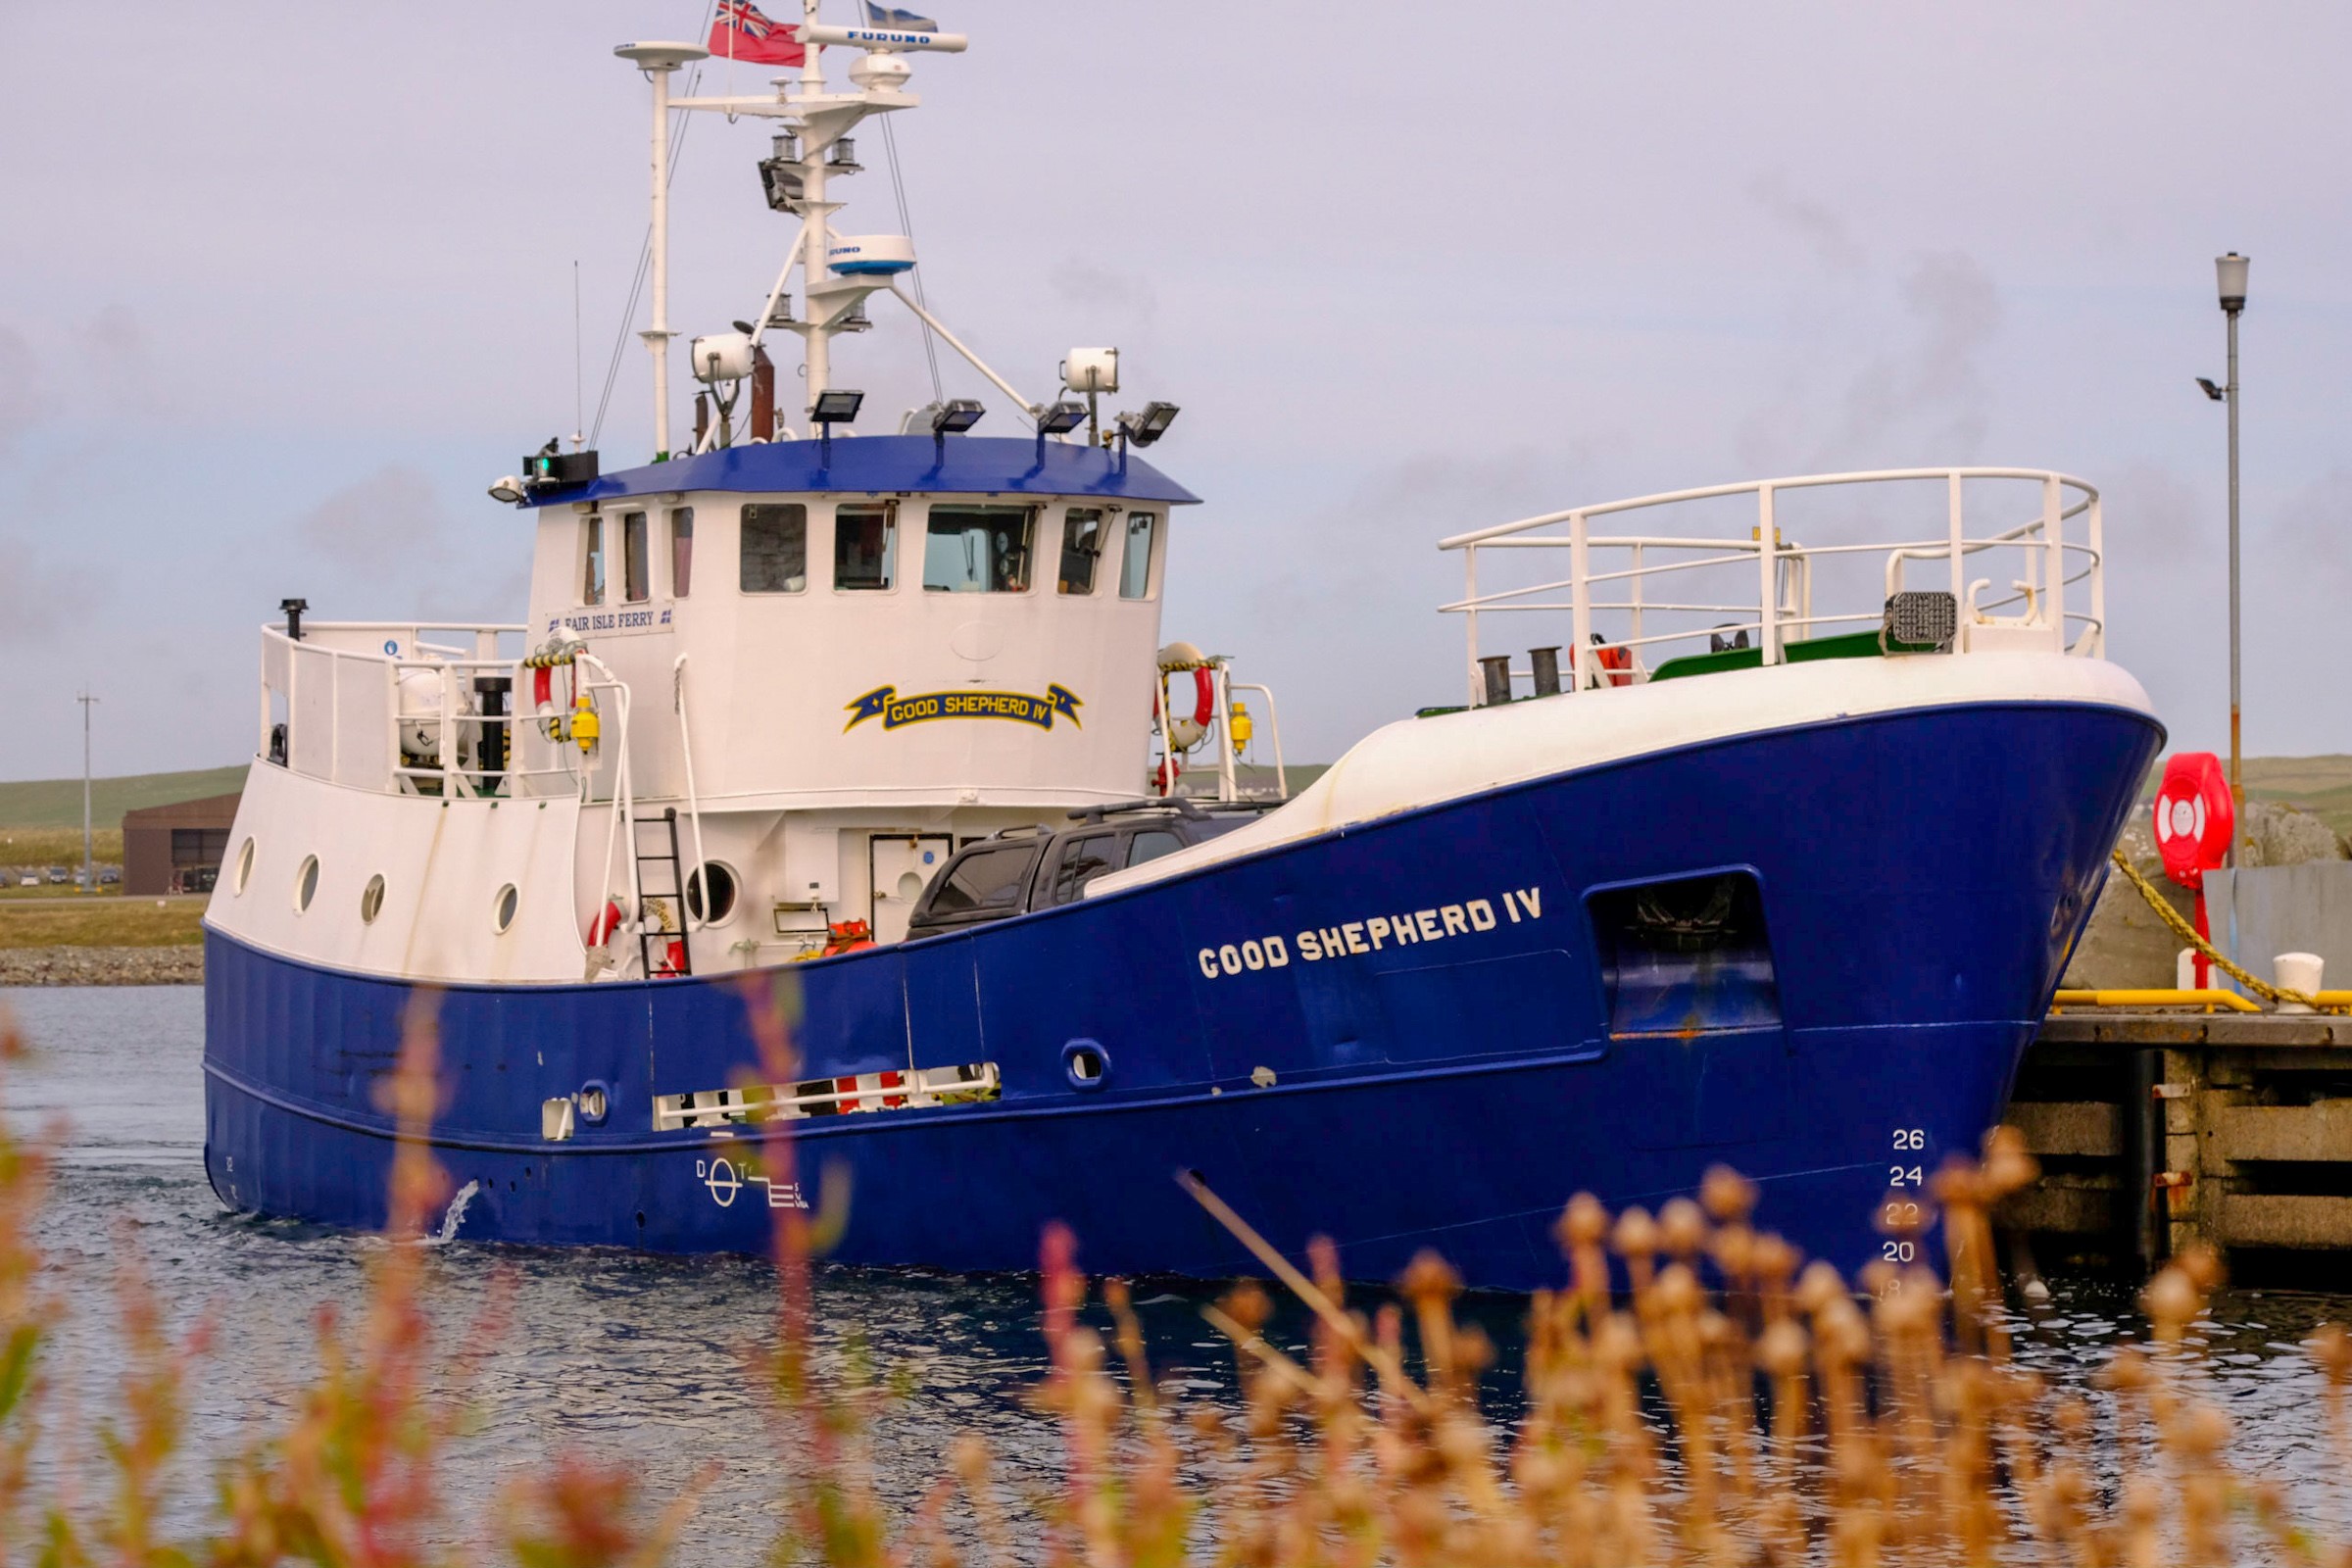 Contract for new Fair Isle ferry could be awarded mid-January